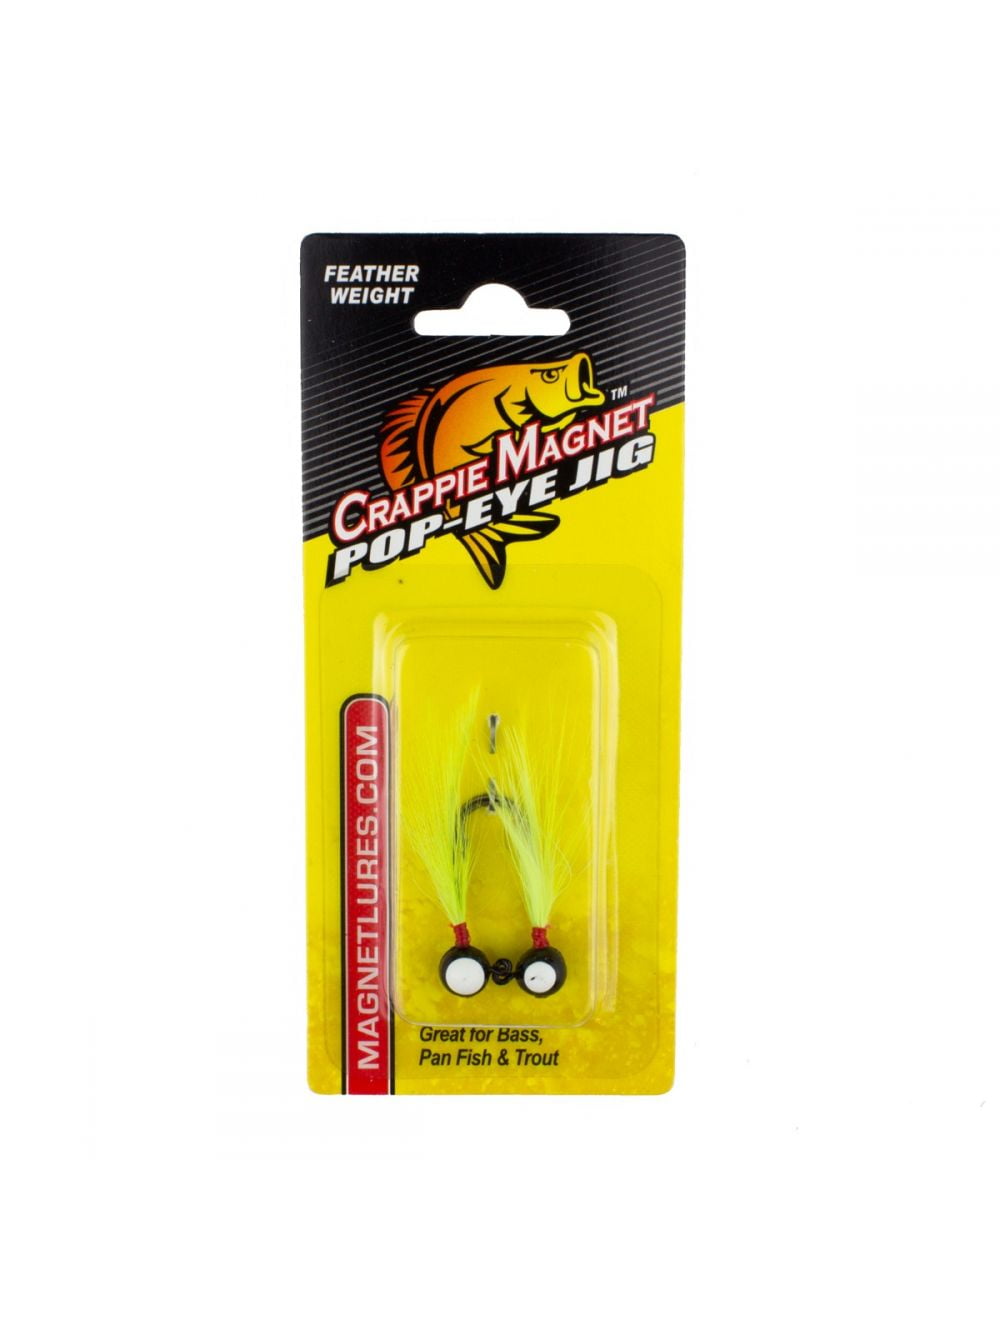 Leland Lures Slab Curly jigs 2 packs  black and chart 